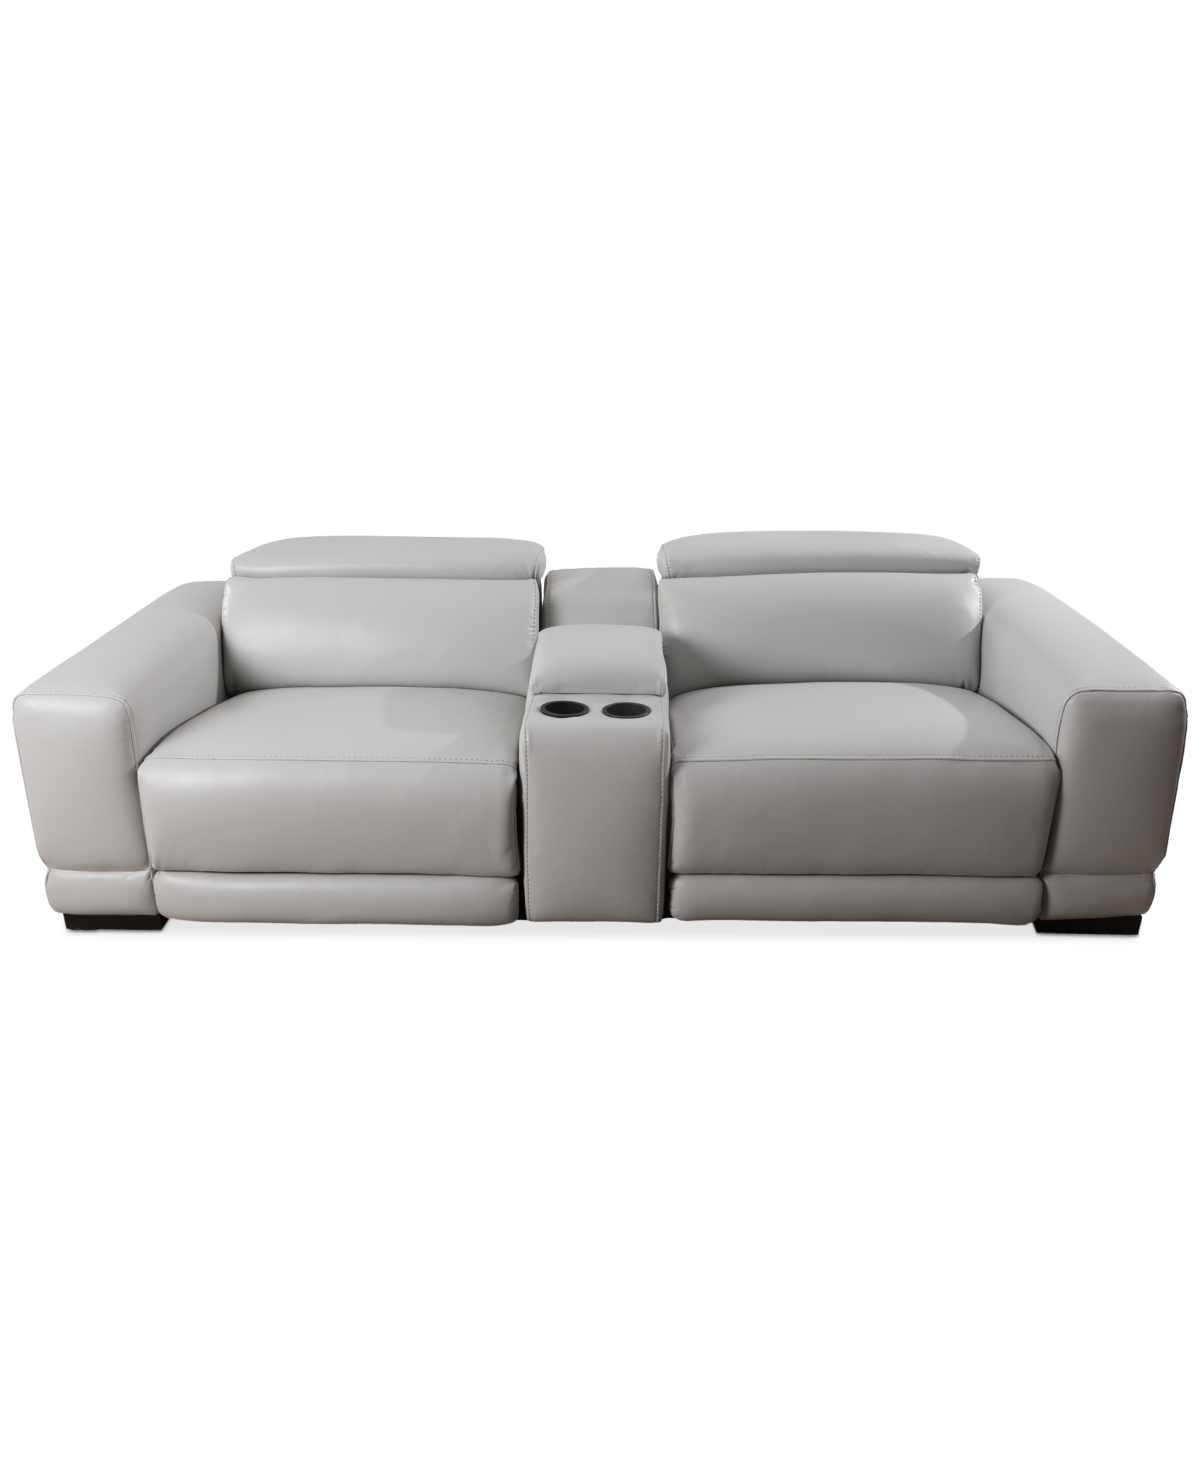 Furniture Krofton 3-pc. Beyond Leather Fabric Sofa With 2 Power Motion Recliners And 1 Console, Created For Ma In Fog